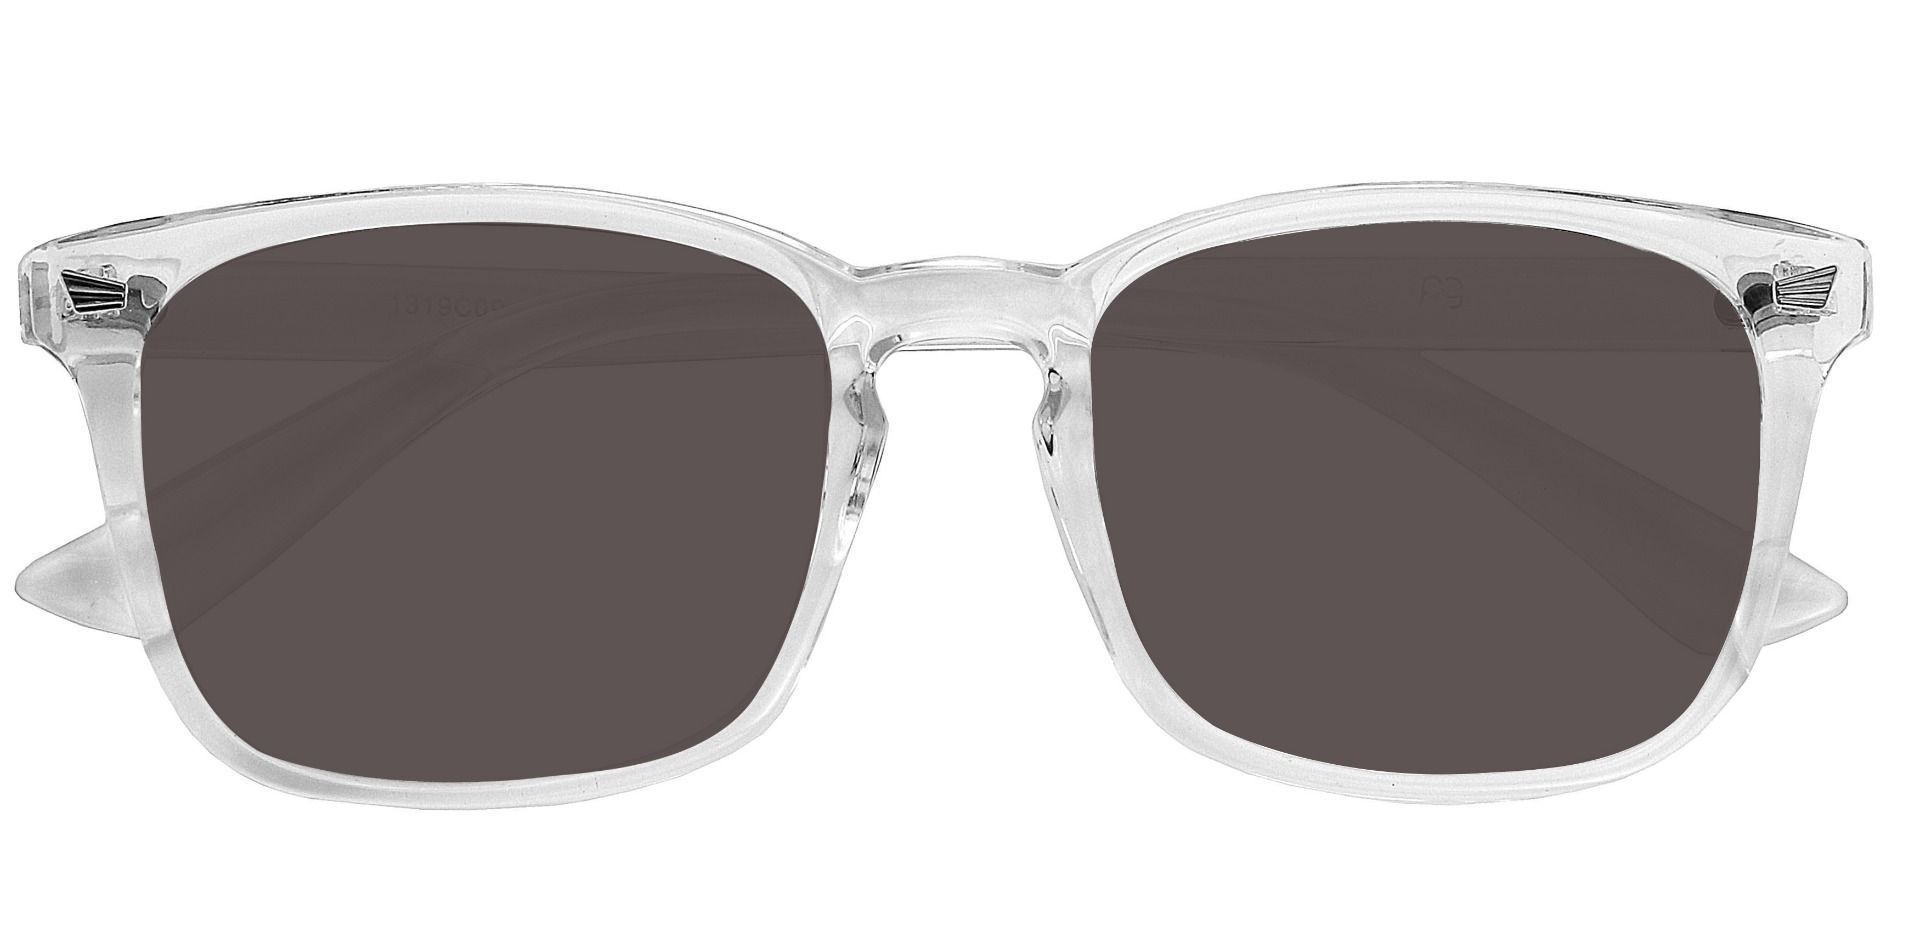 Rogan Square Non-Rx Sunglasses - Clear Frame With Gray Lenses